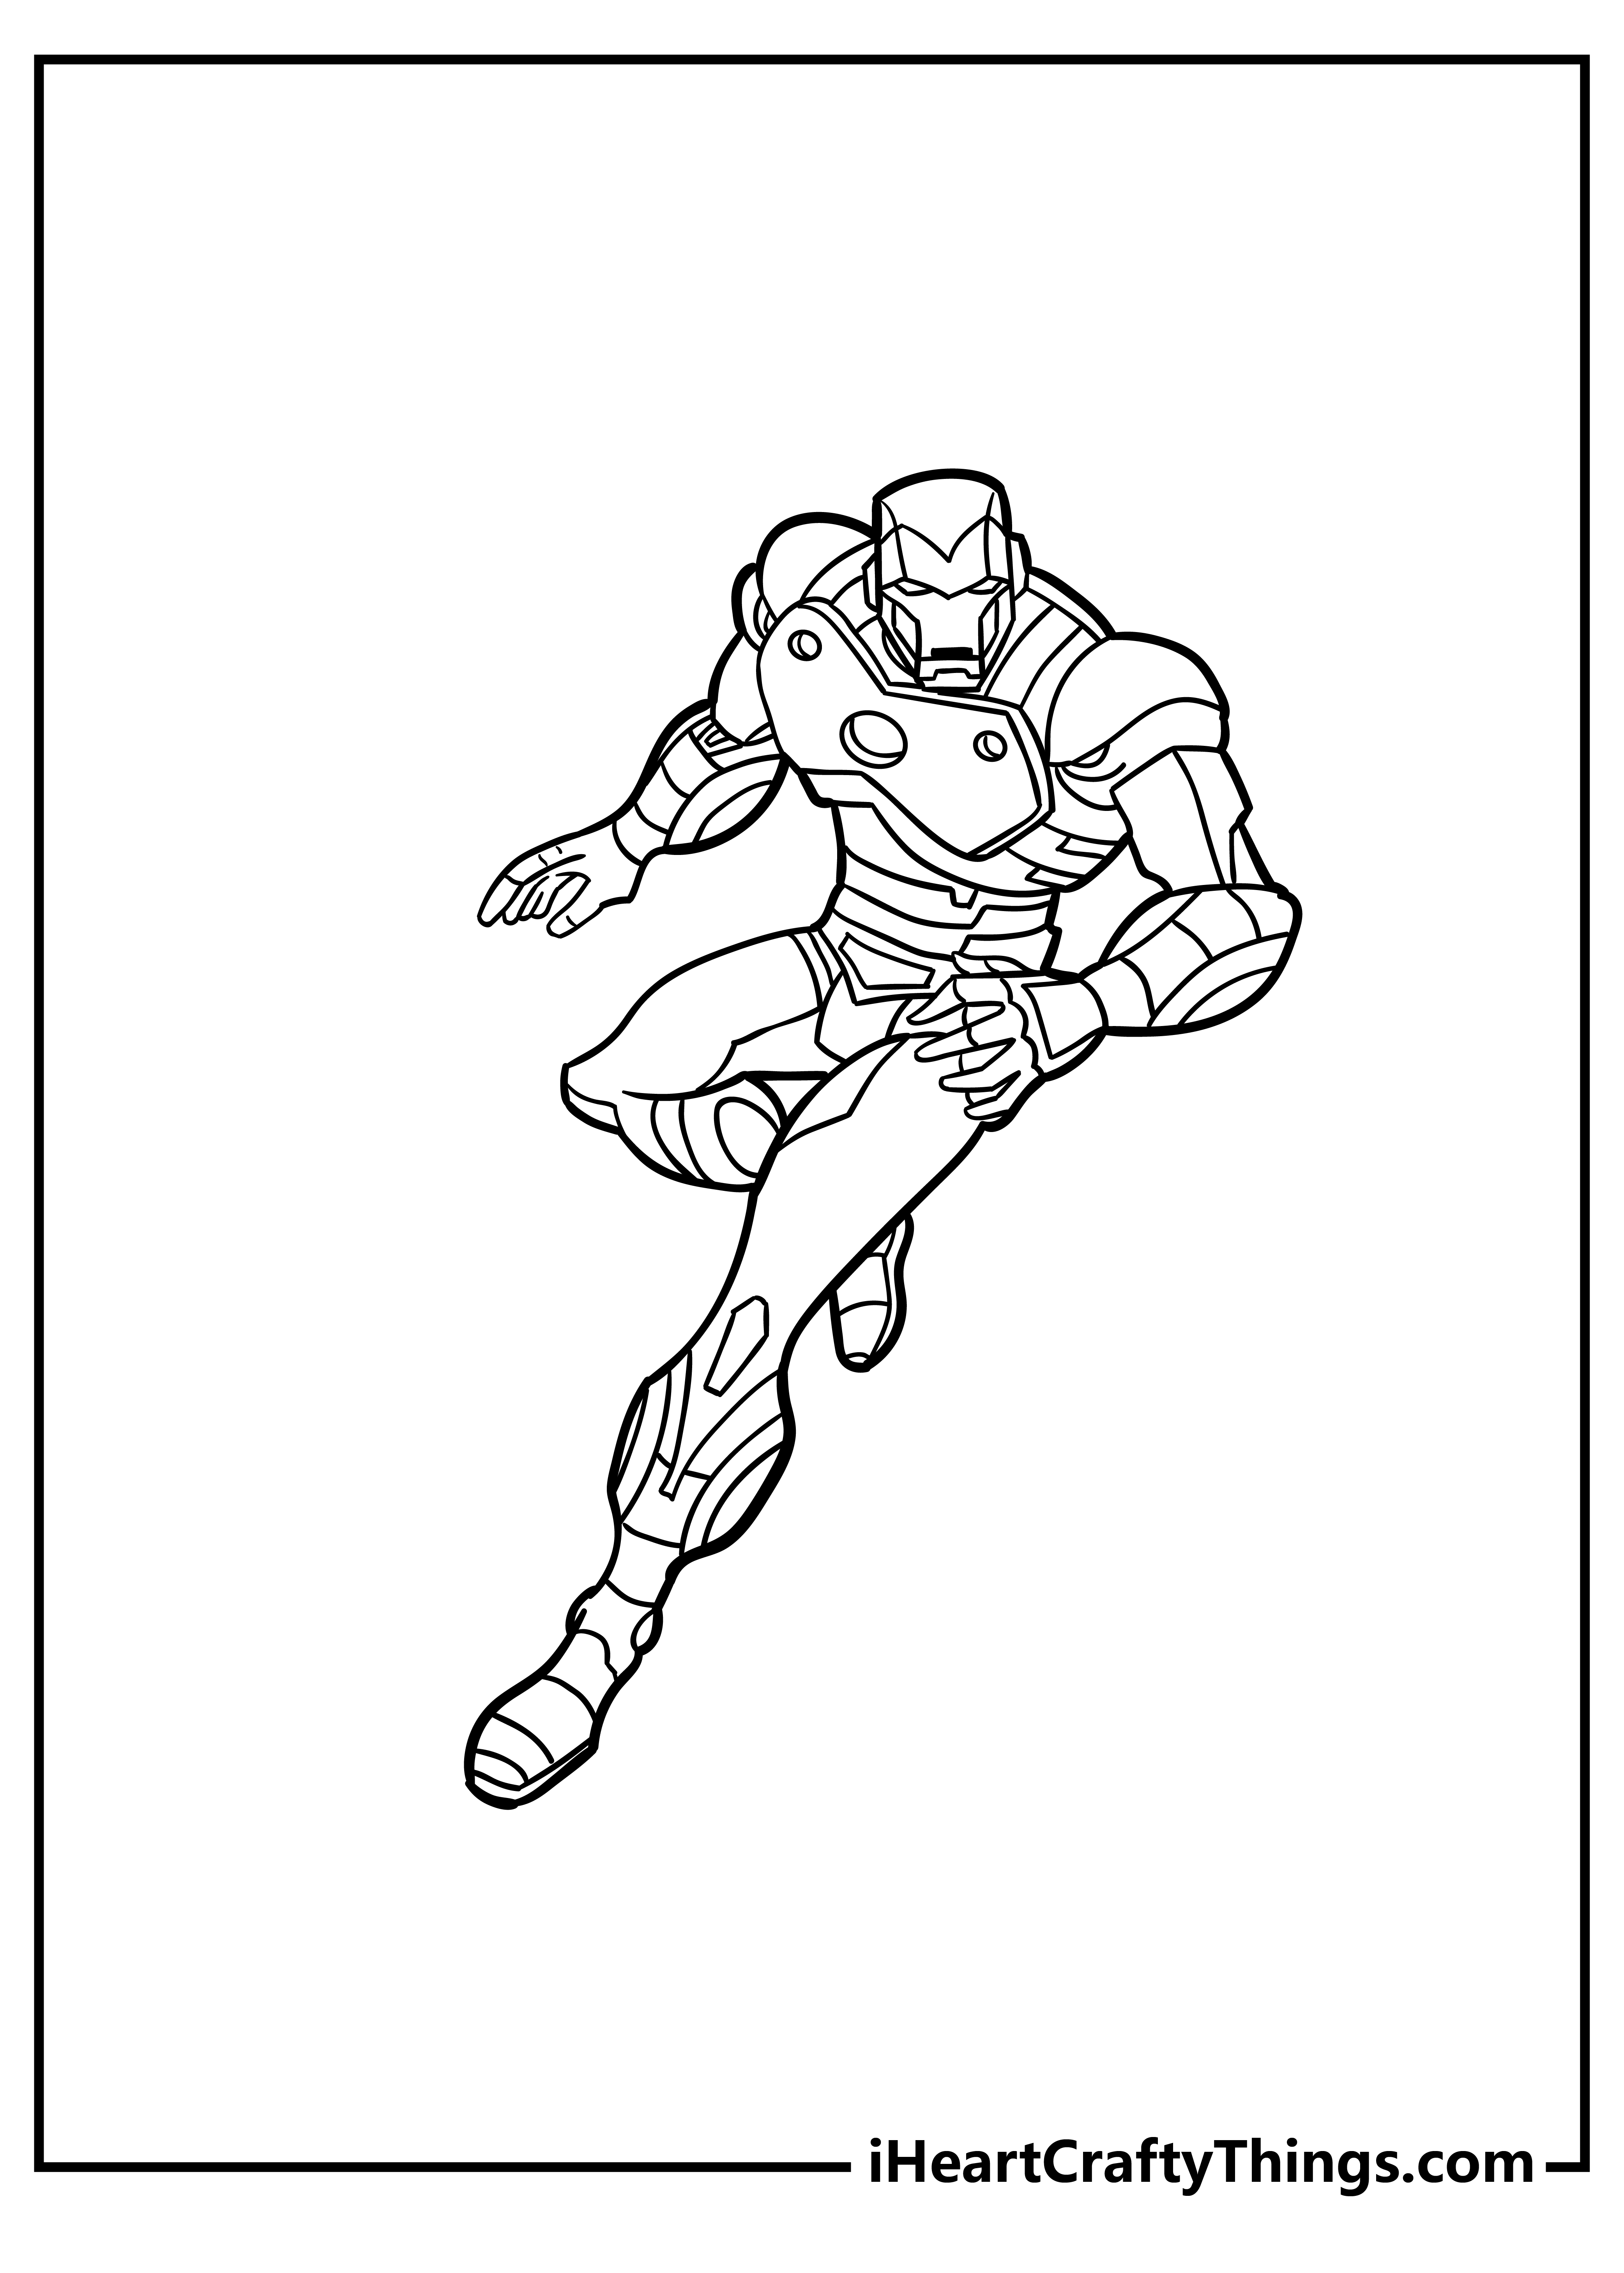 Iron Man Coloring Book for adults free download